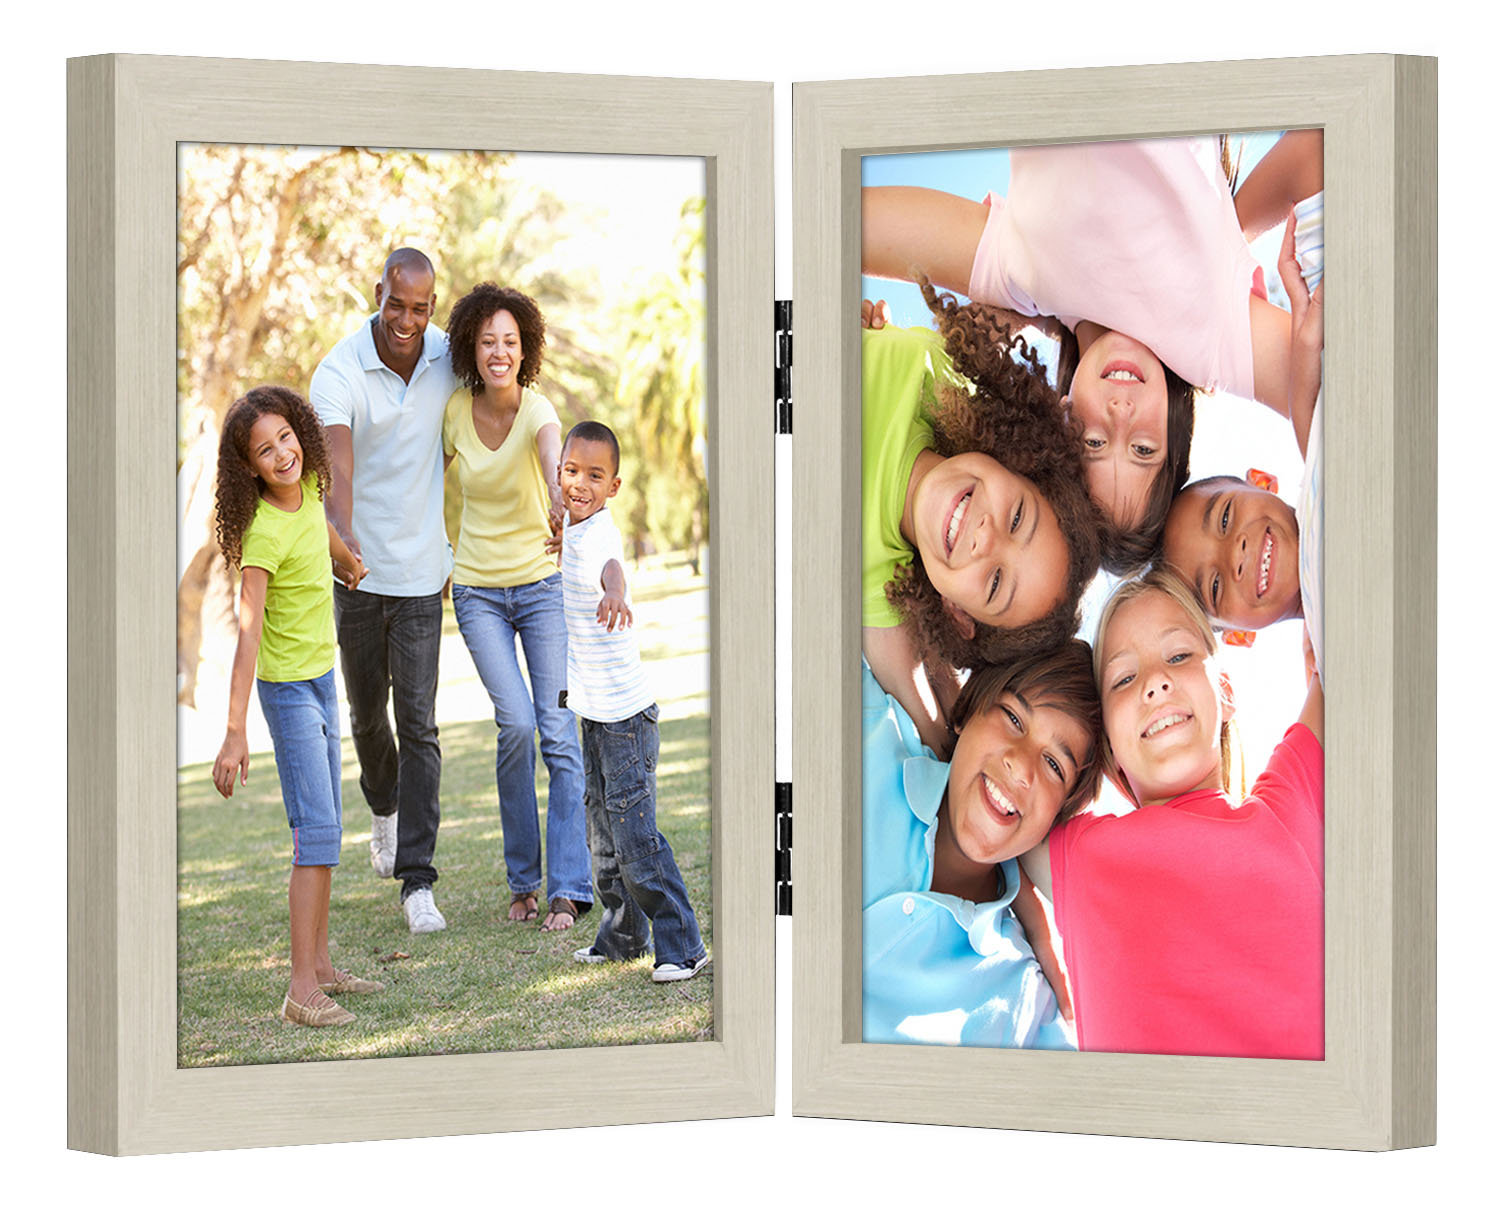 4x6-inch 2-6 Opening Mahogany Vertical Picture Frame